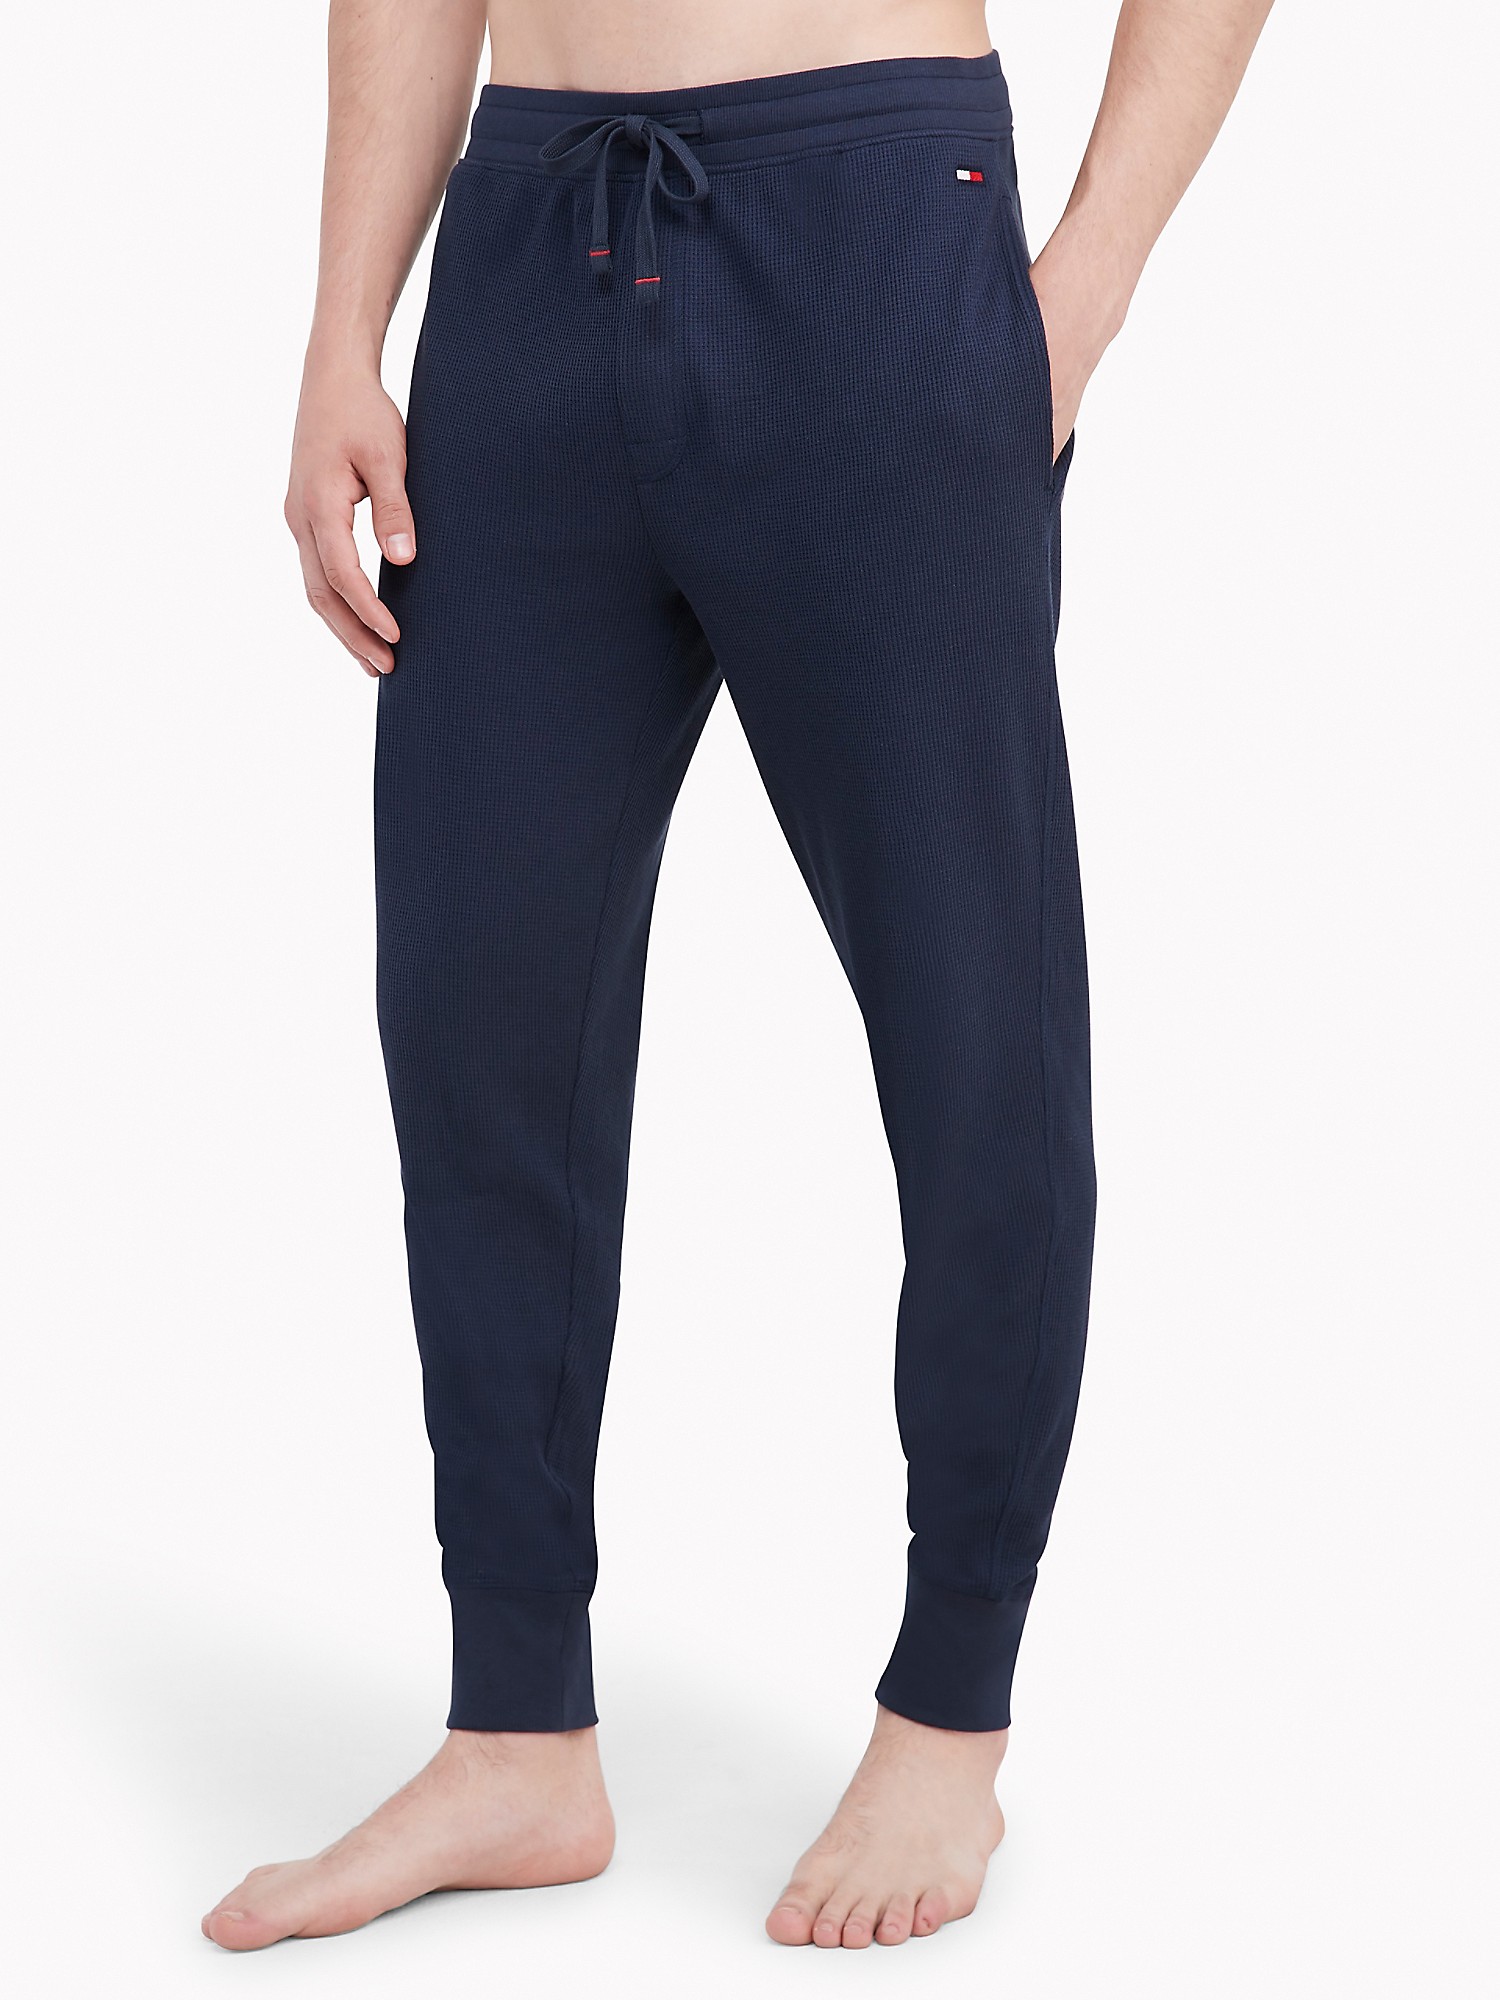 TOMMY HILFIGER: Men’s Thermal Waffle Joggers $10